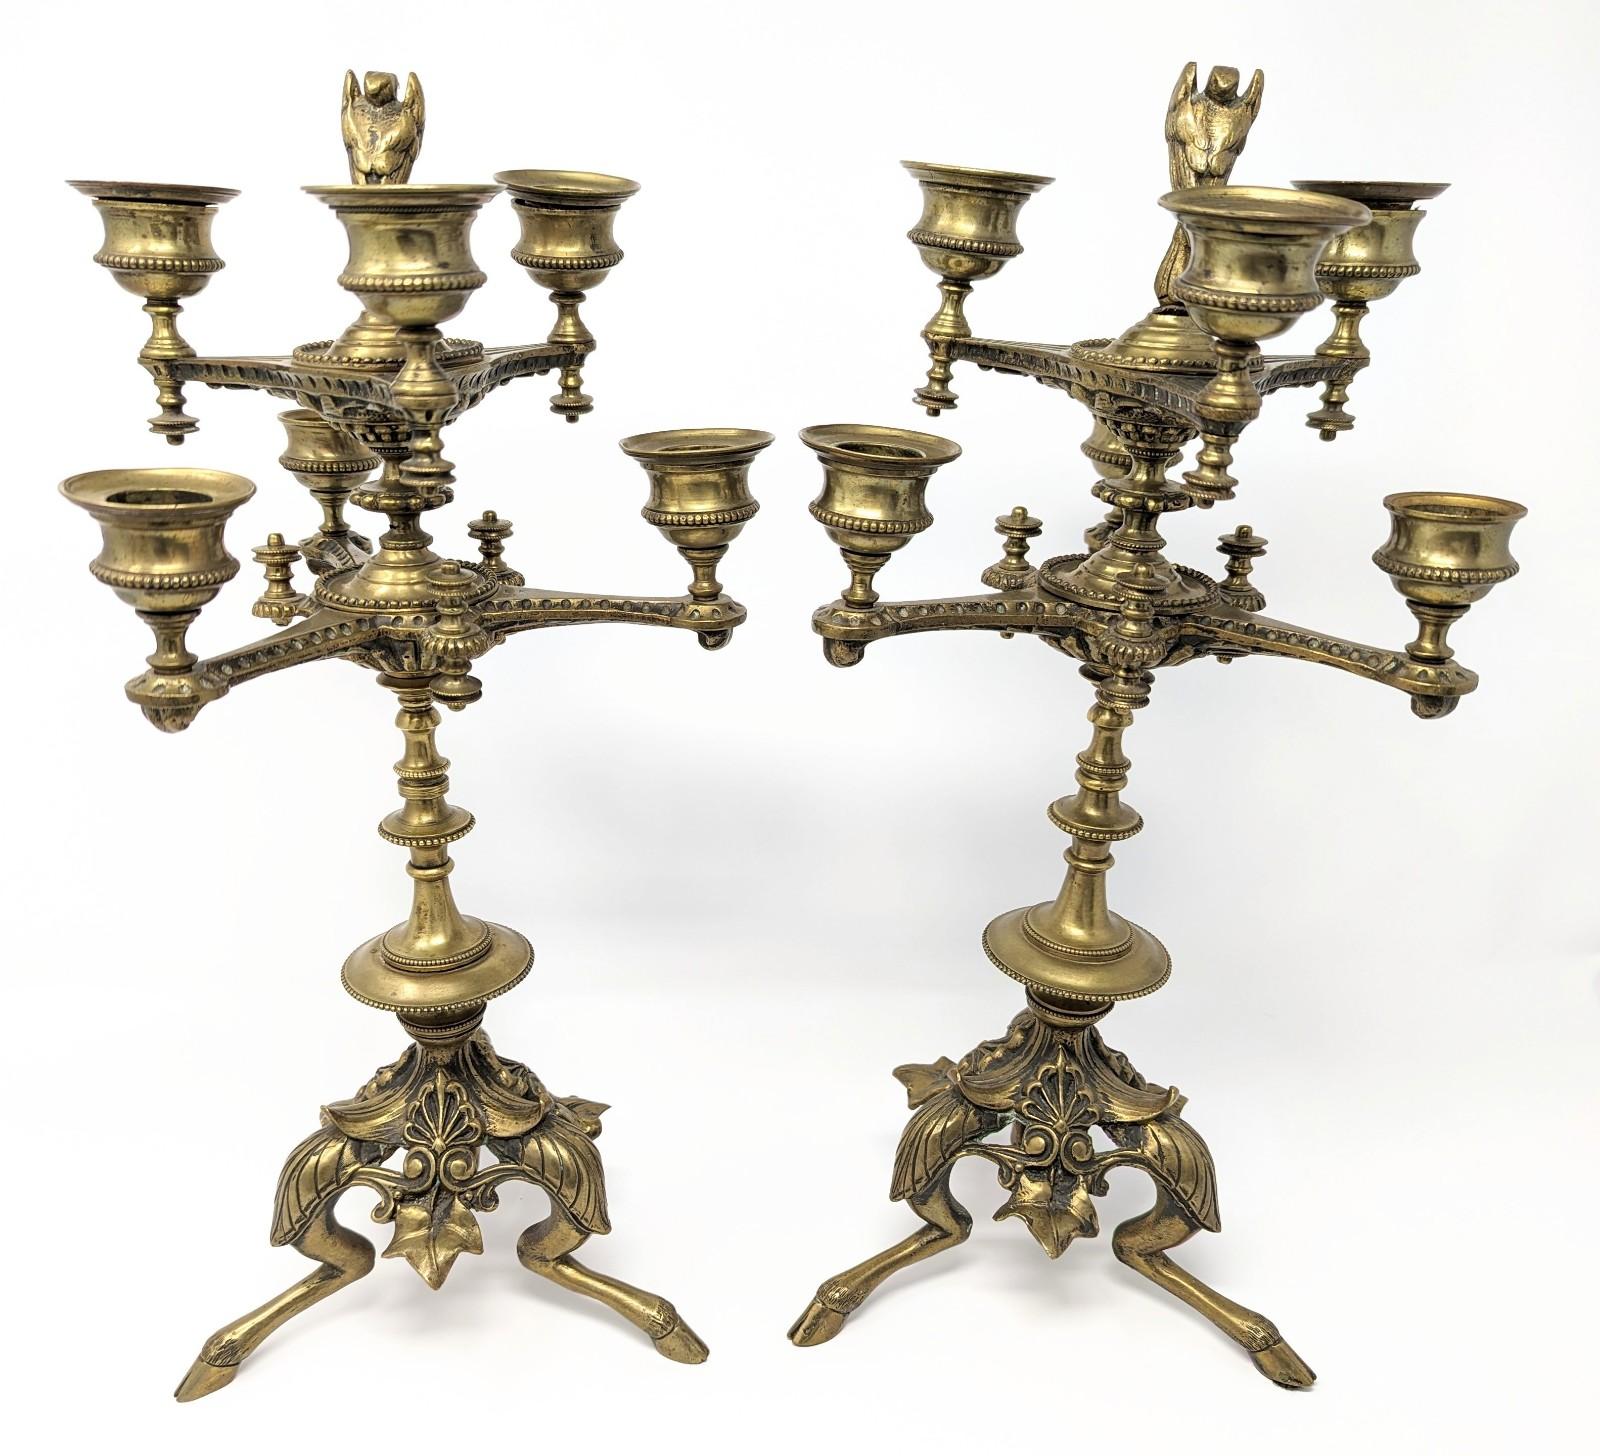 Pair of Antique Candelabras, 19th Century European Brass Candlesticks Footed In Fair Condition For Sale In Greer, SC